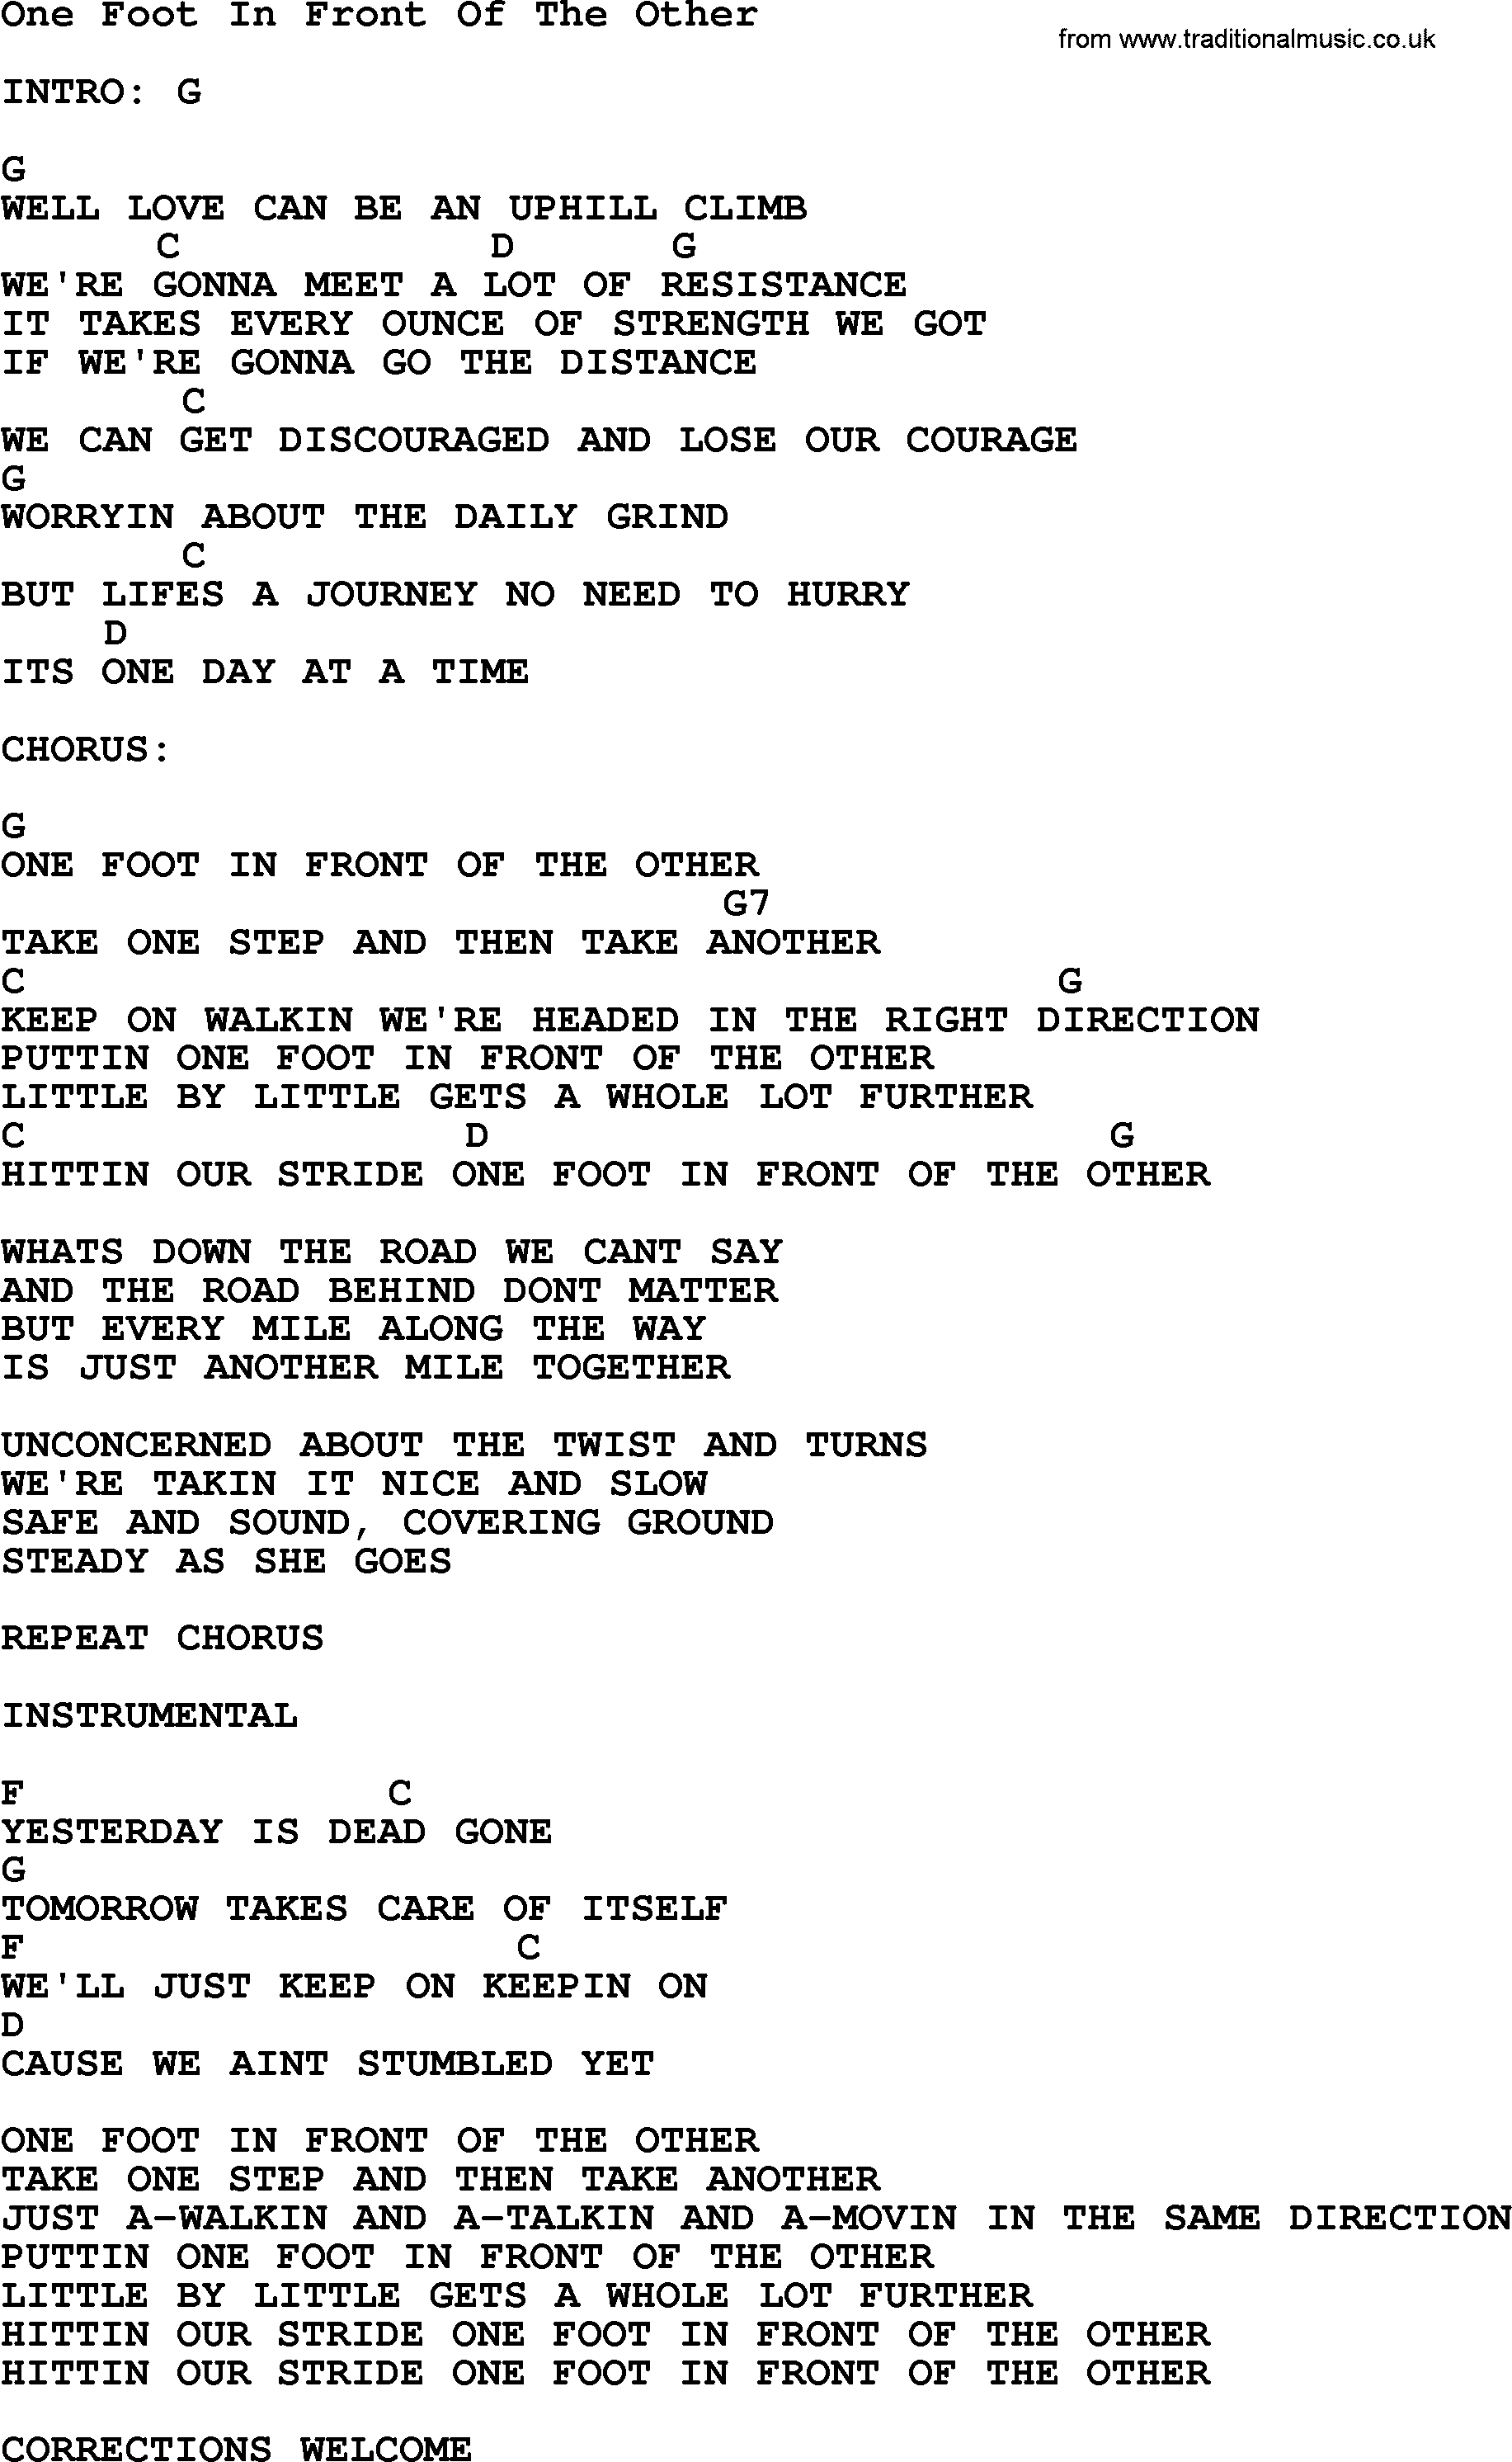 George Strait song: One Foot In Front Of The Other, lyrics and chords